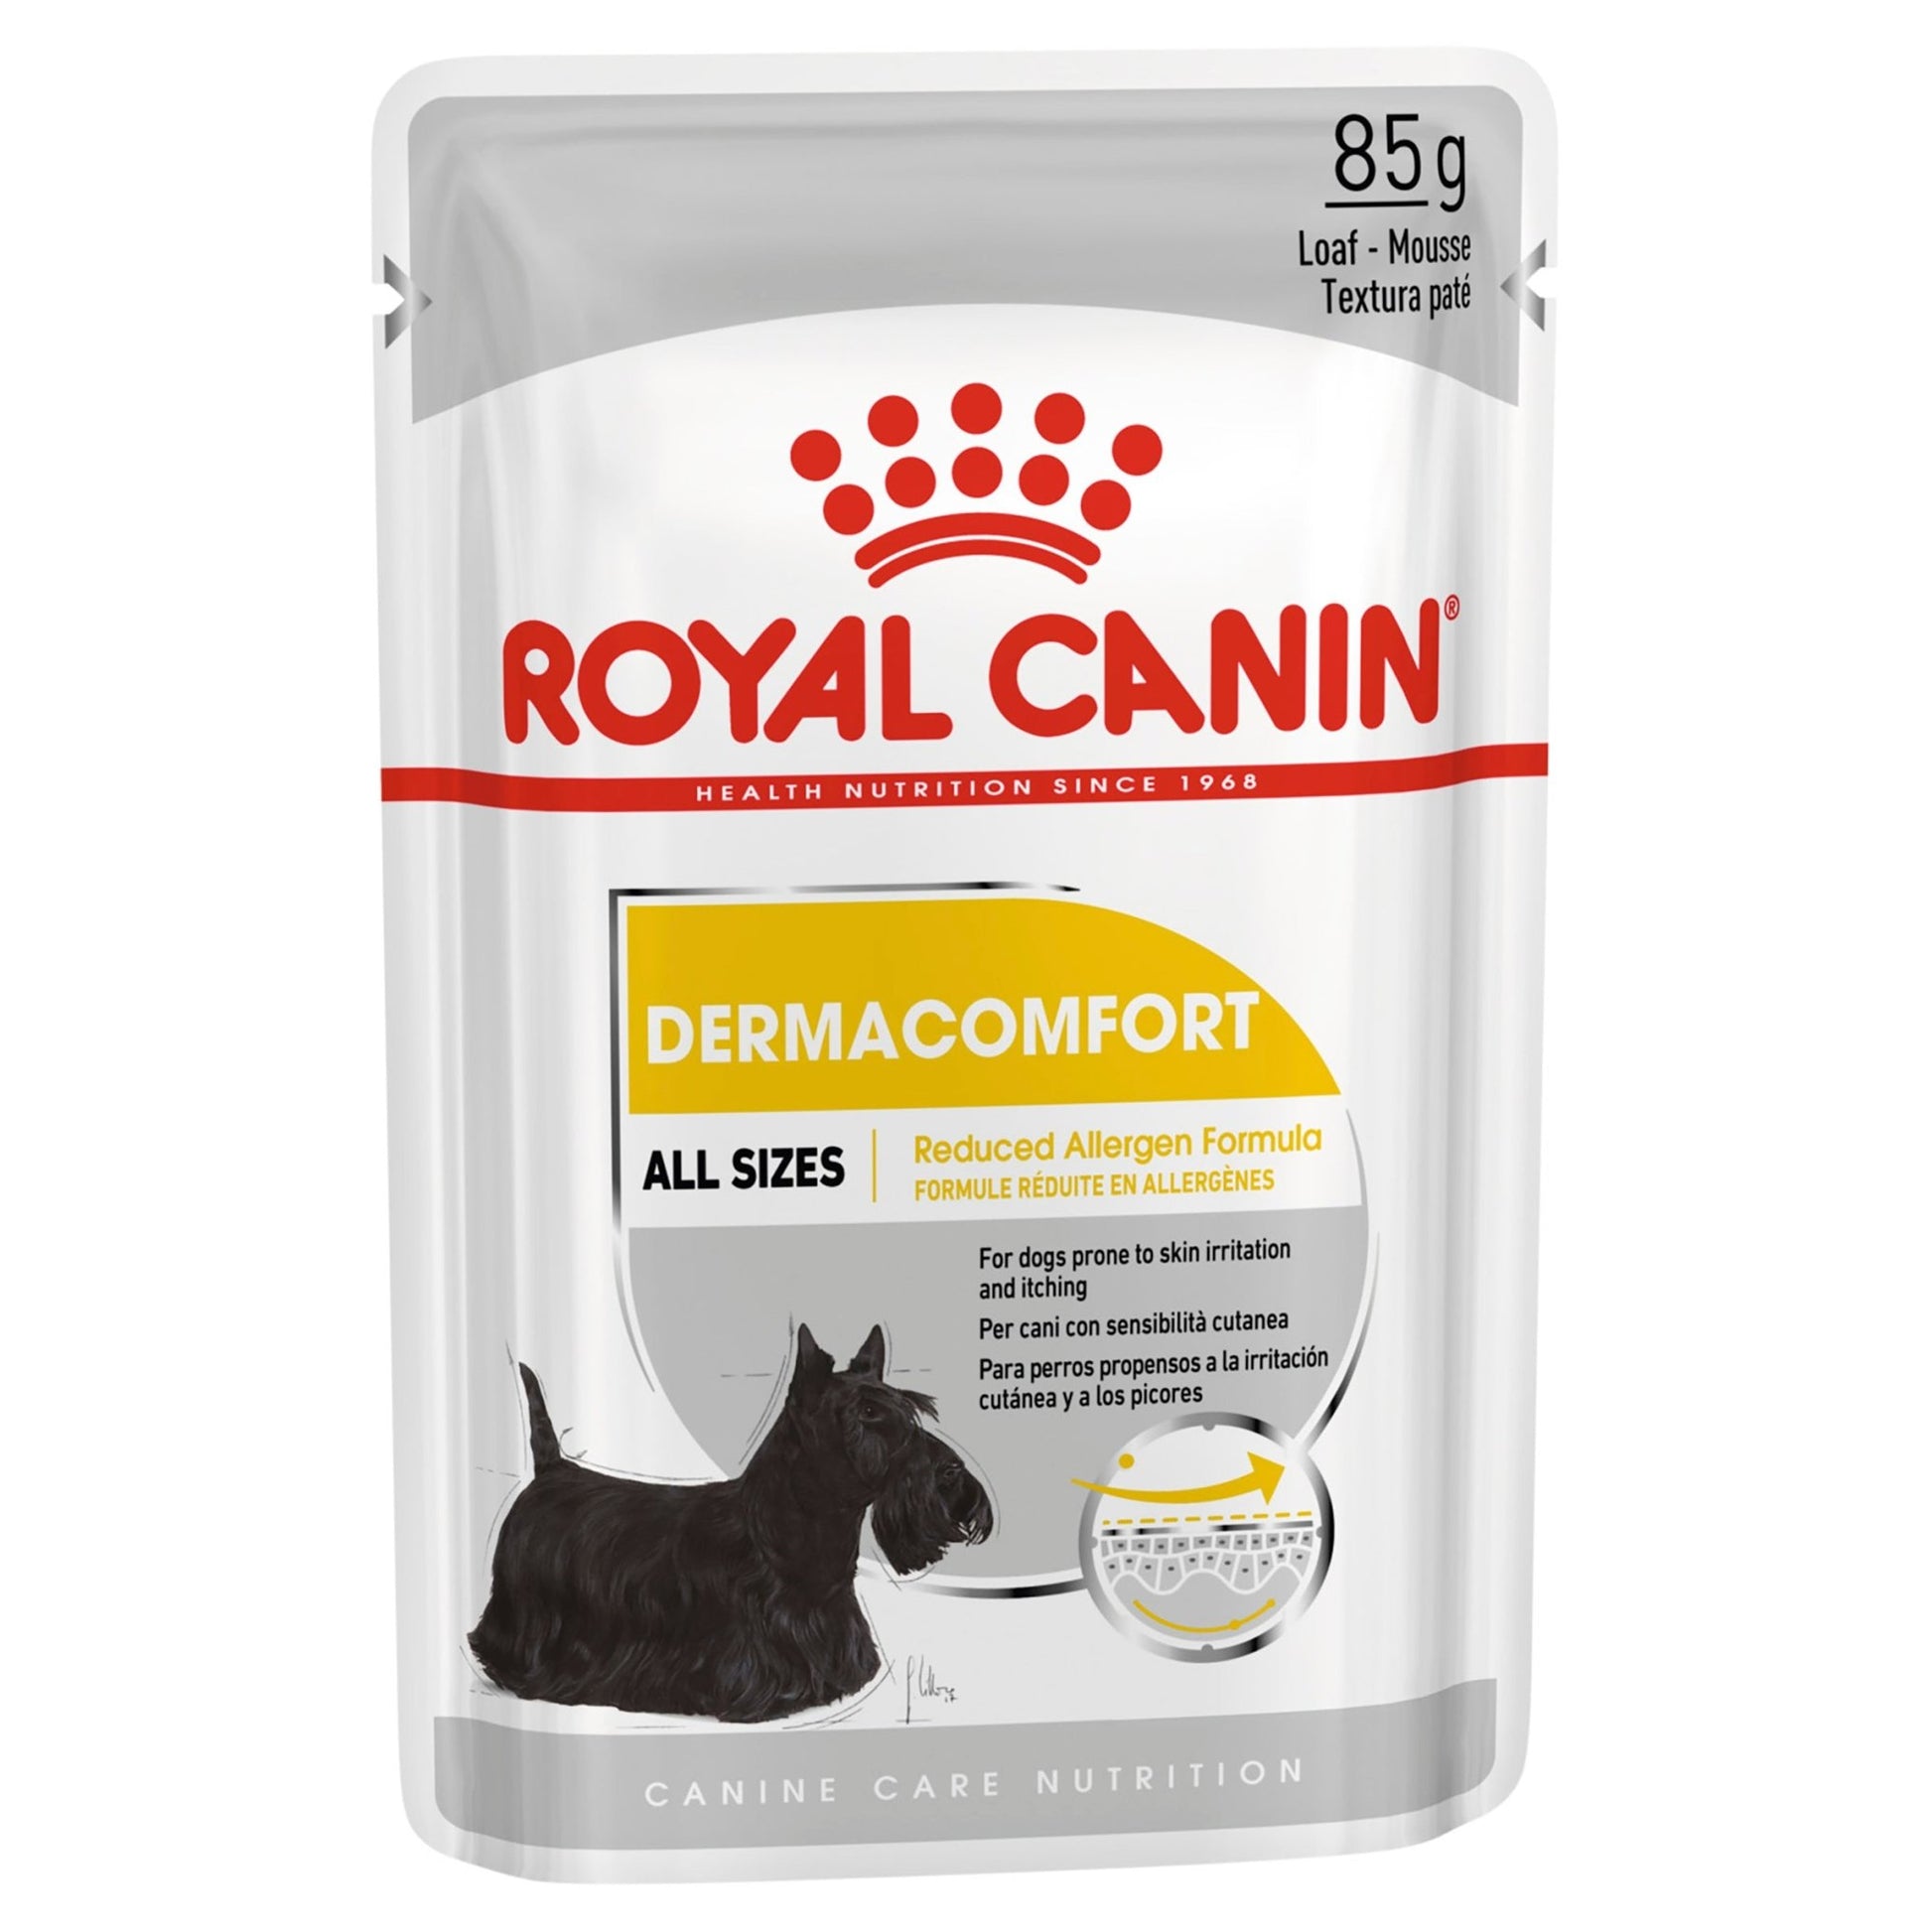 Royal Canin Dog Wet Pouches Dermacomfort Care Loaf 12x85g - Woonona Petfood & Produce